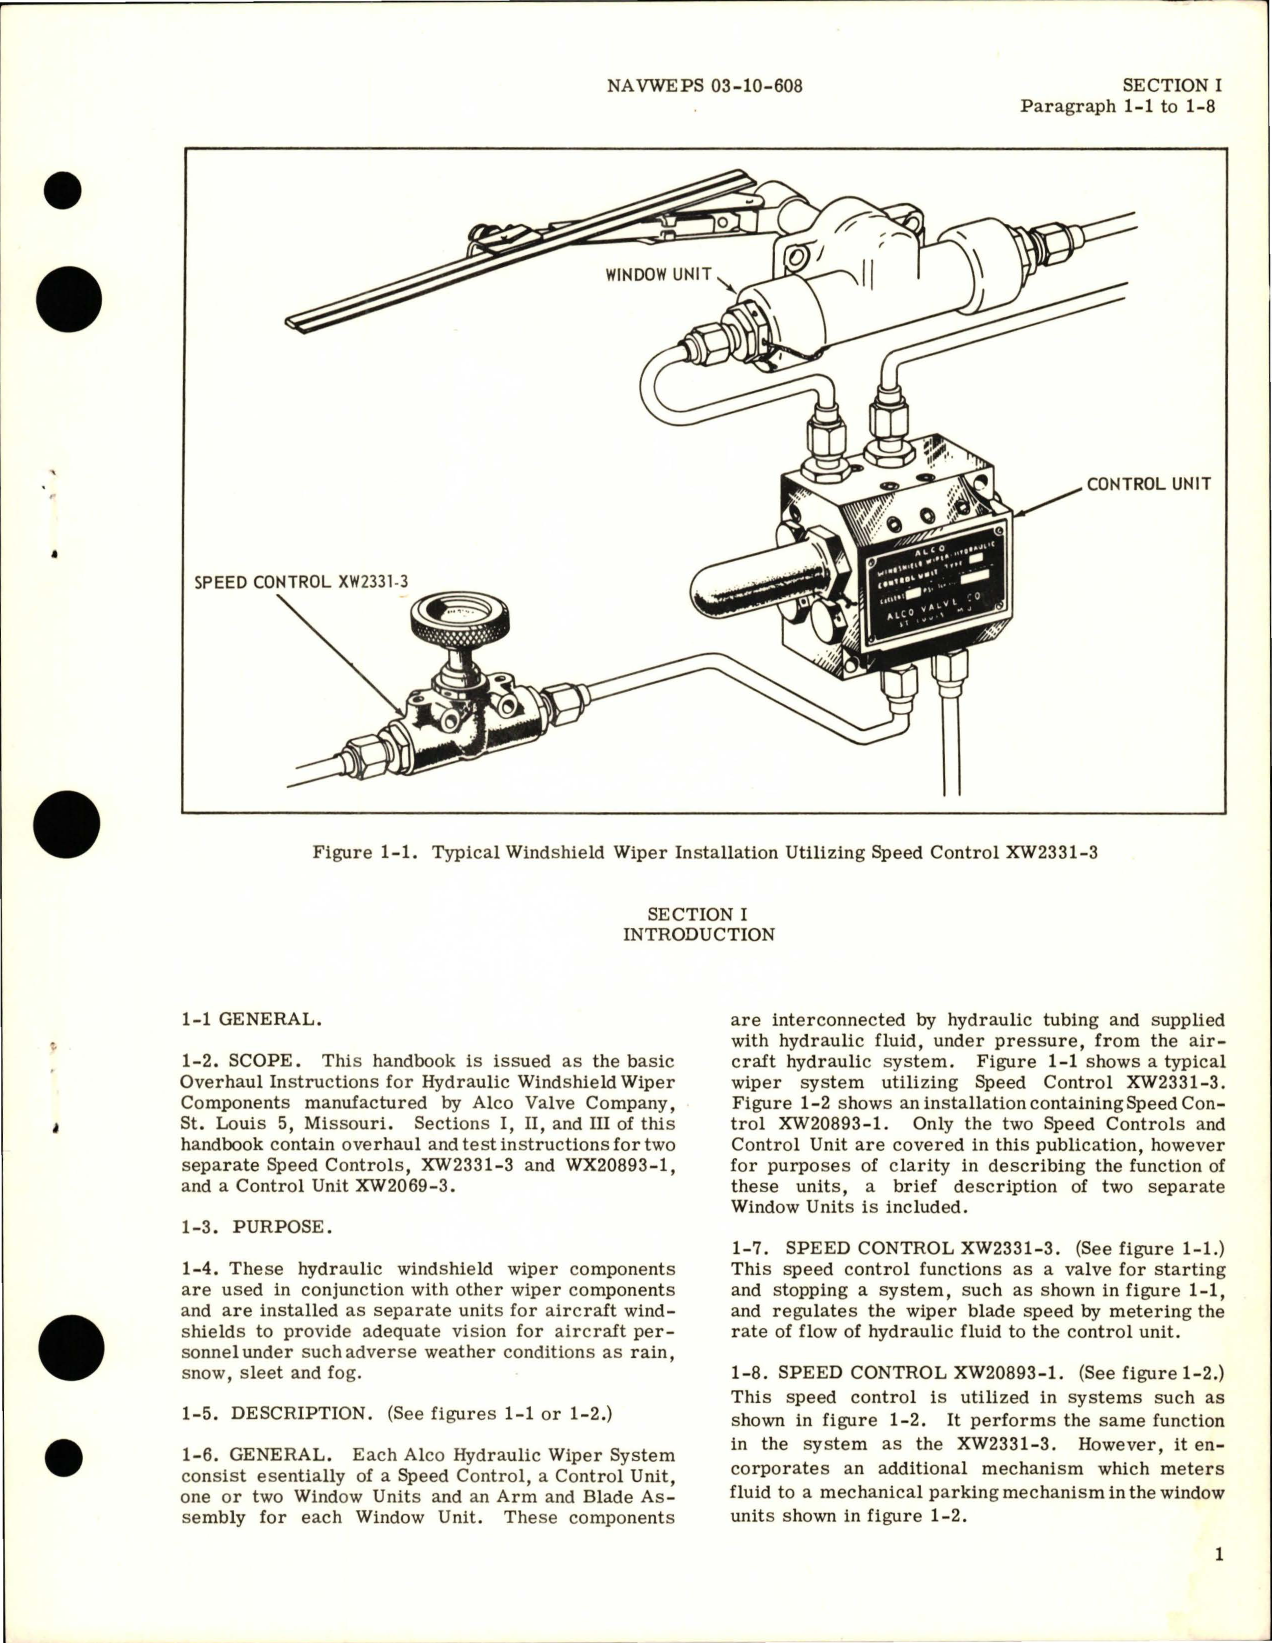 Sample page 5 from AirCorps Library document: Overhaul Instructions for Hydraulic Windshield Wiper System Components - Control Unit XW2069-3, Speed Control XW2331-3, and 20893-1